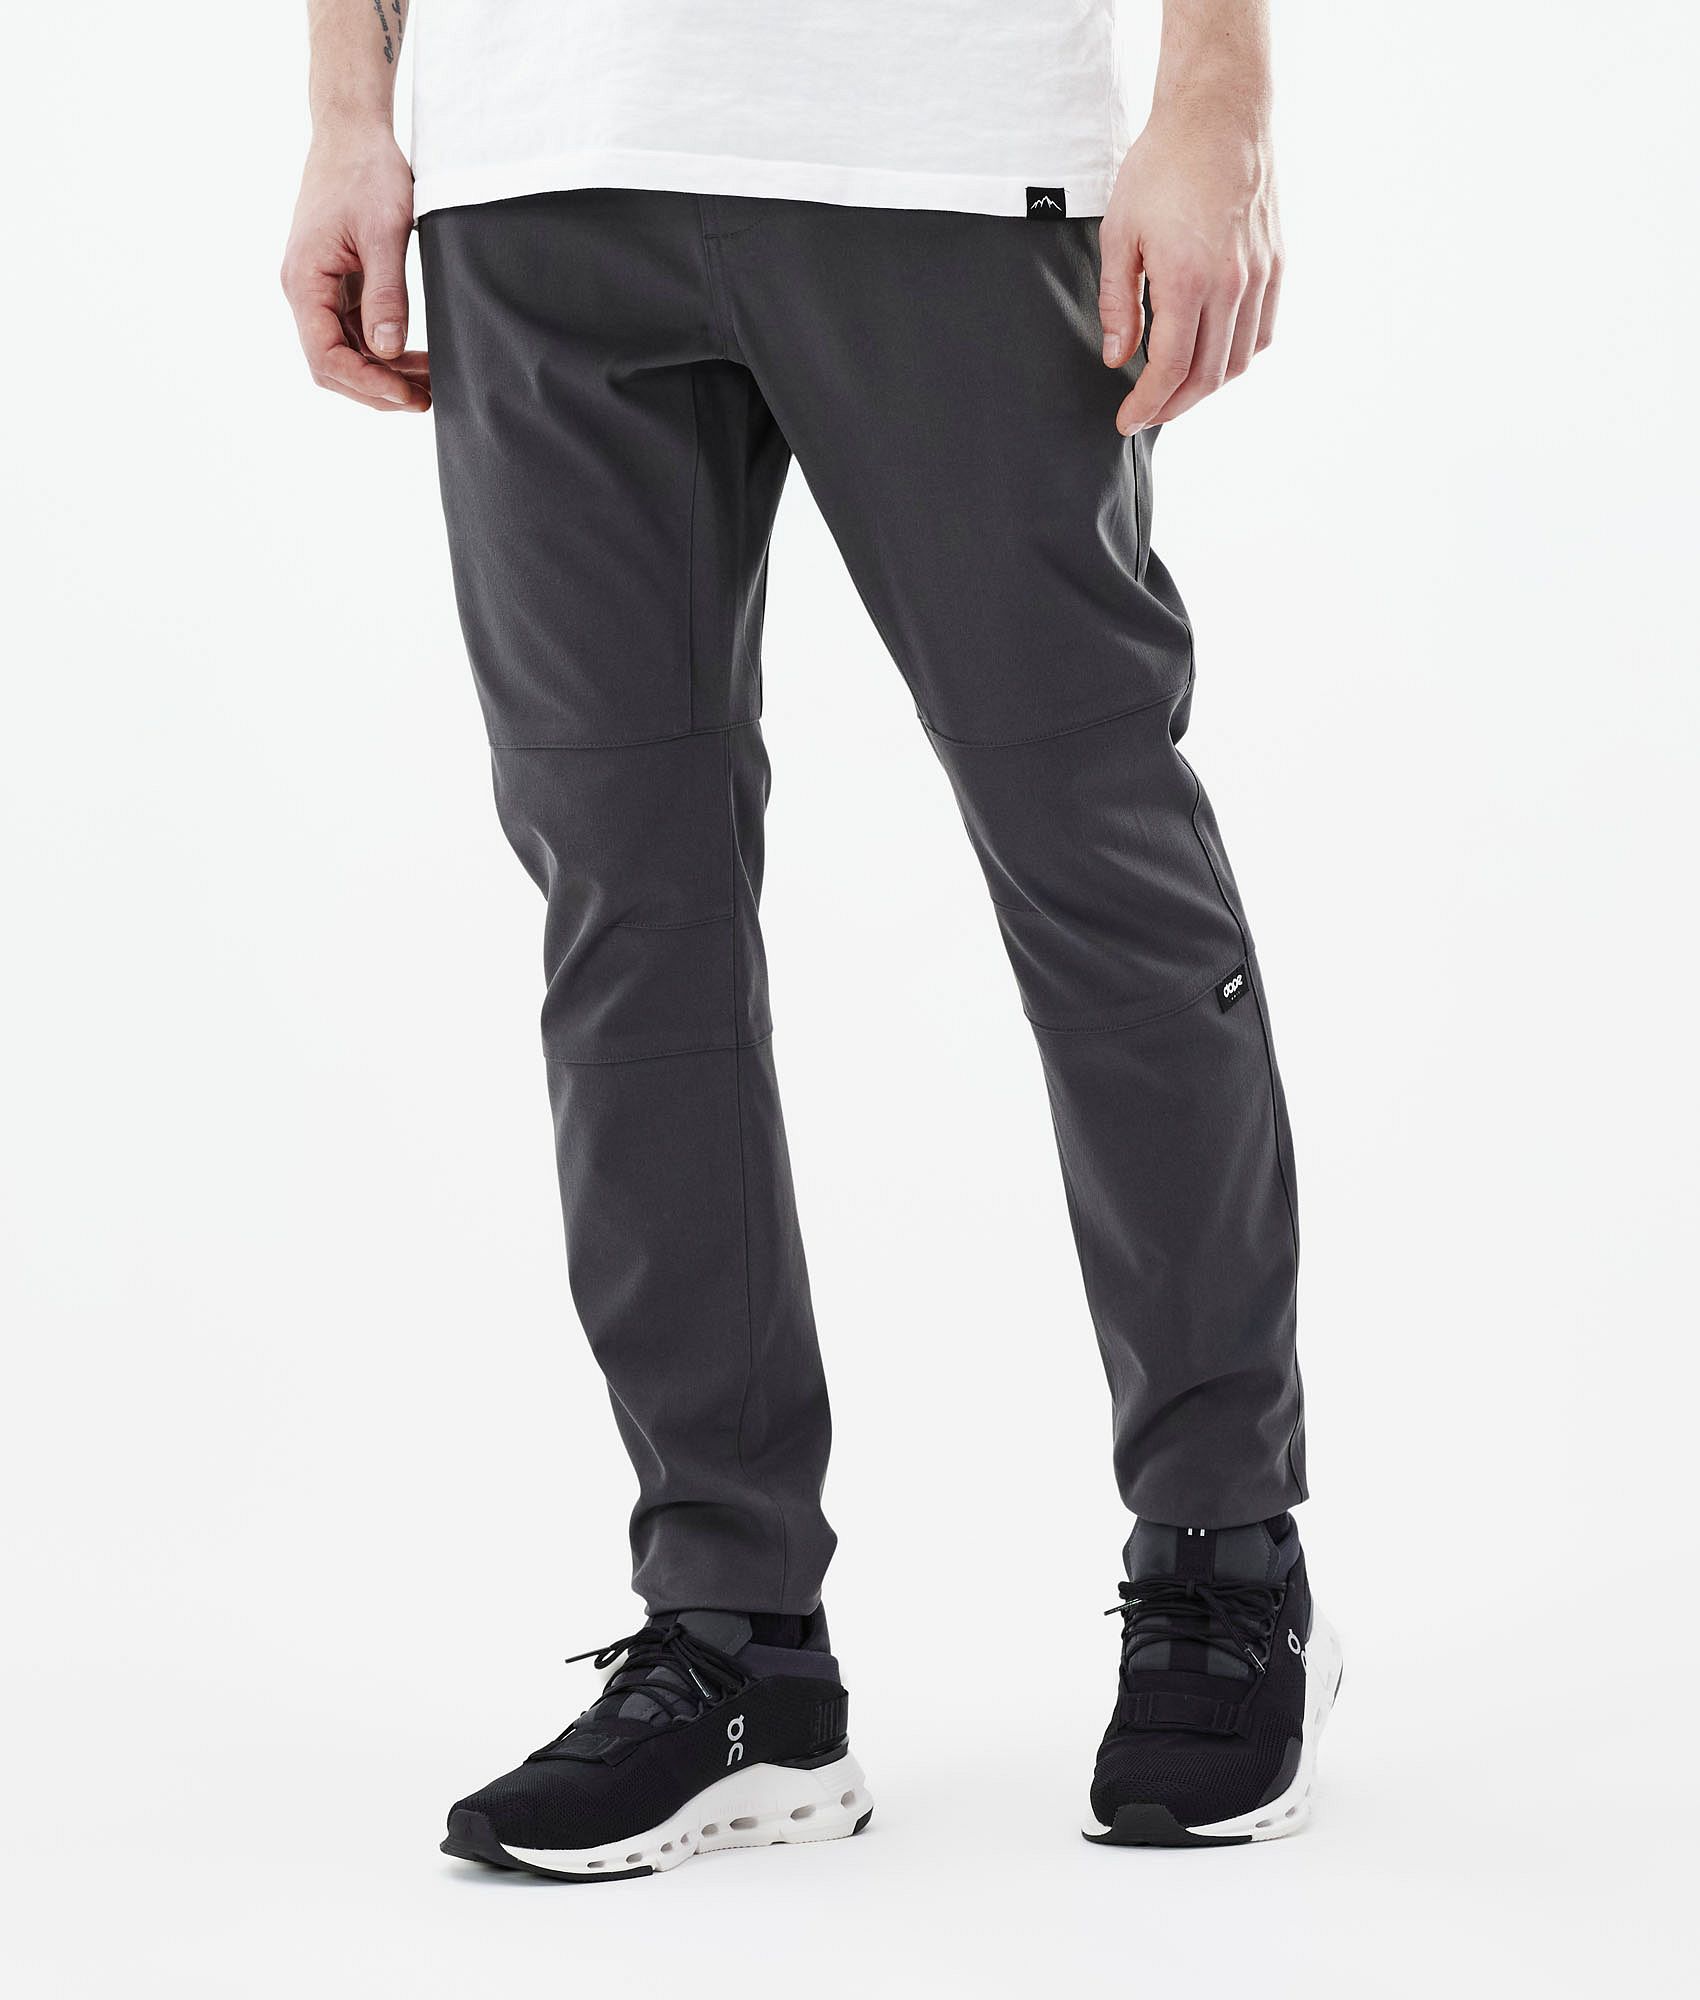 SAL PANTS TROUSERS GREY - Lois Jeans® Official UK Site